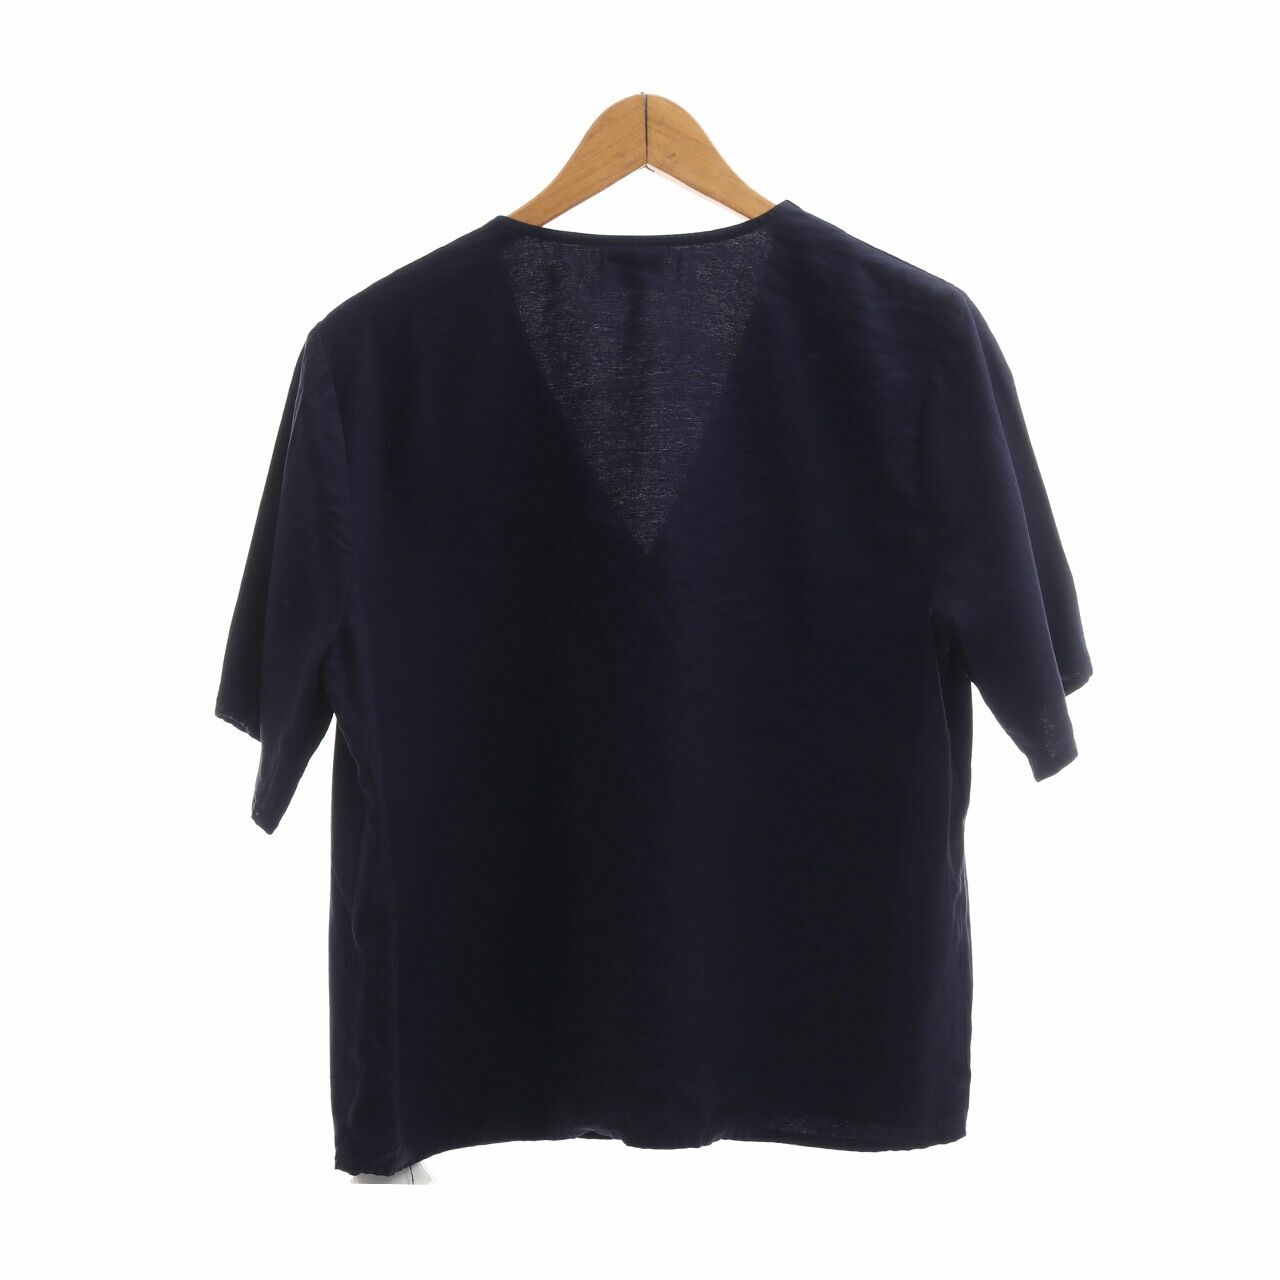 This is April Navy Blouse